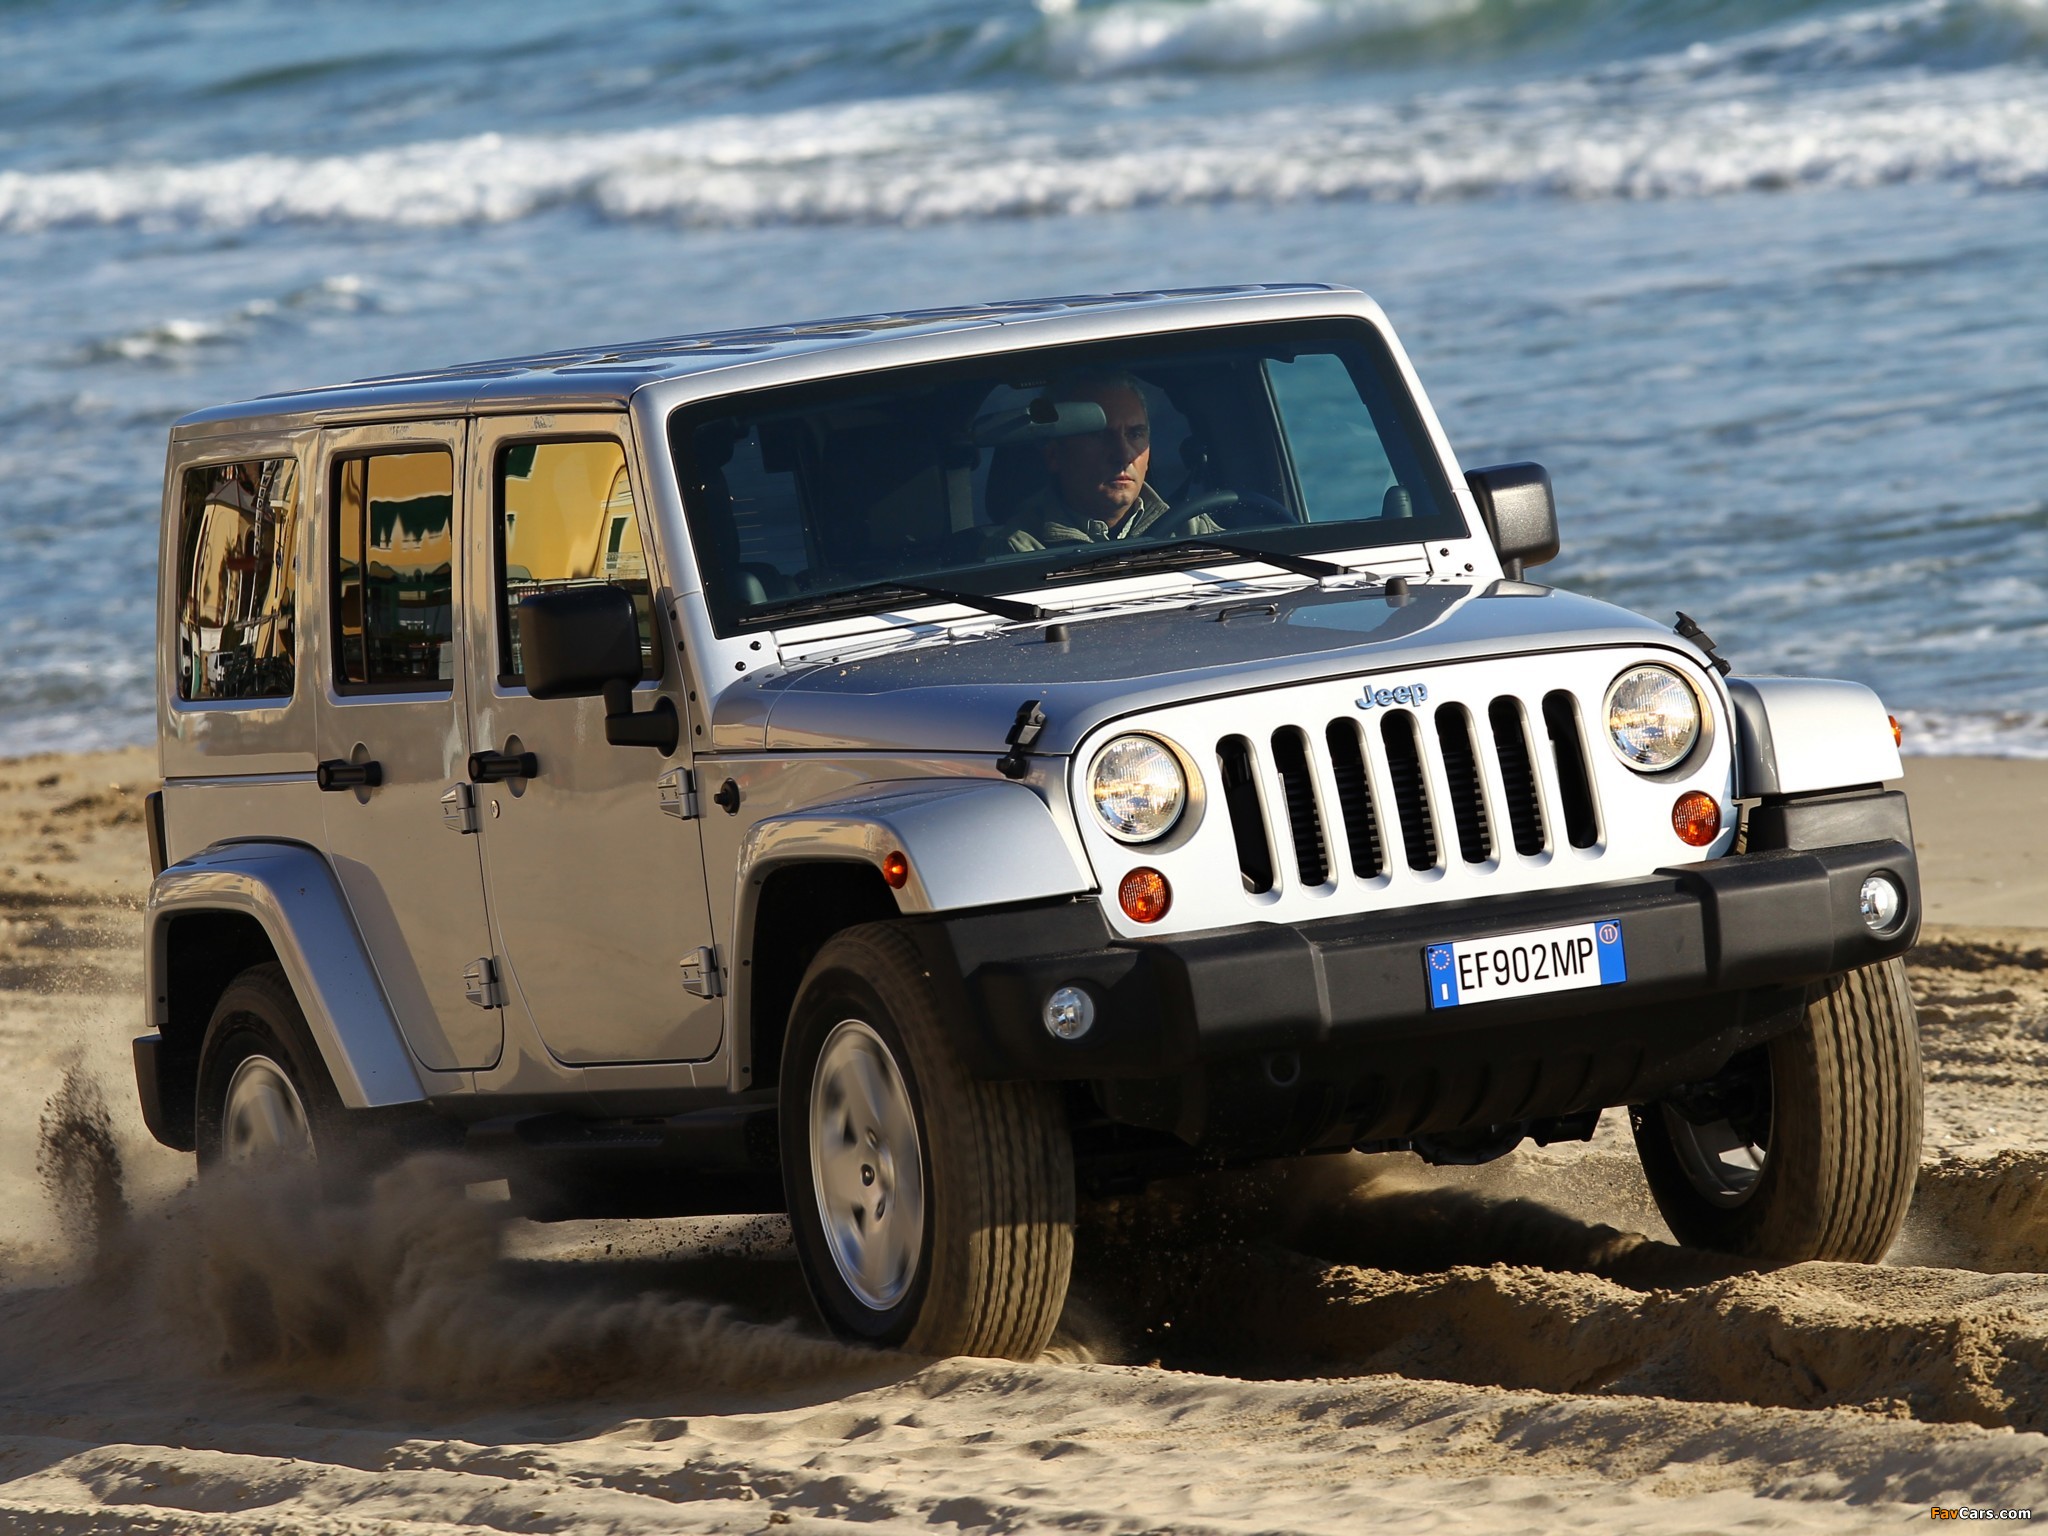 Jeep Wrangler Unlimited Sahara HD Wallpaper Image Crazy Gallery